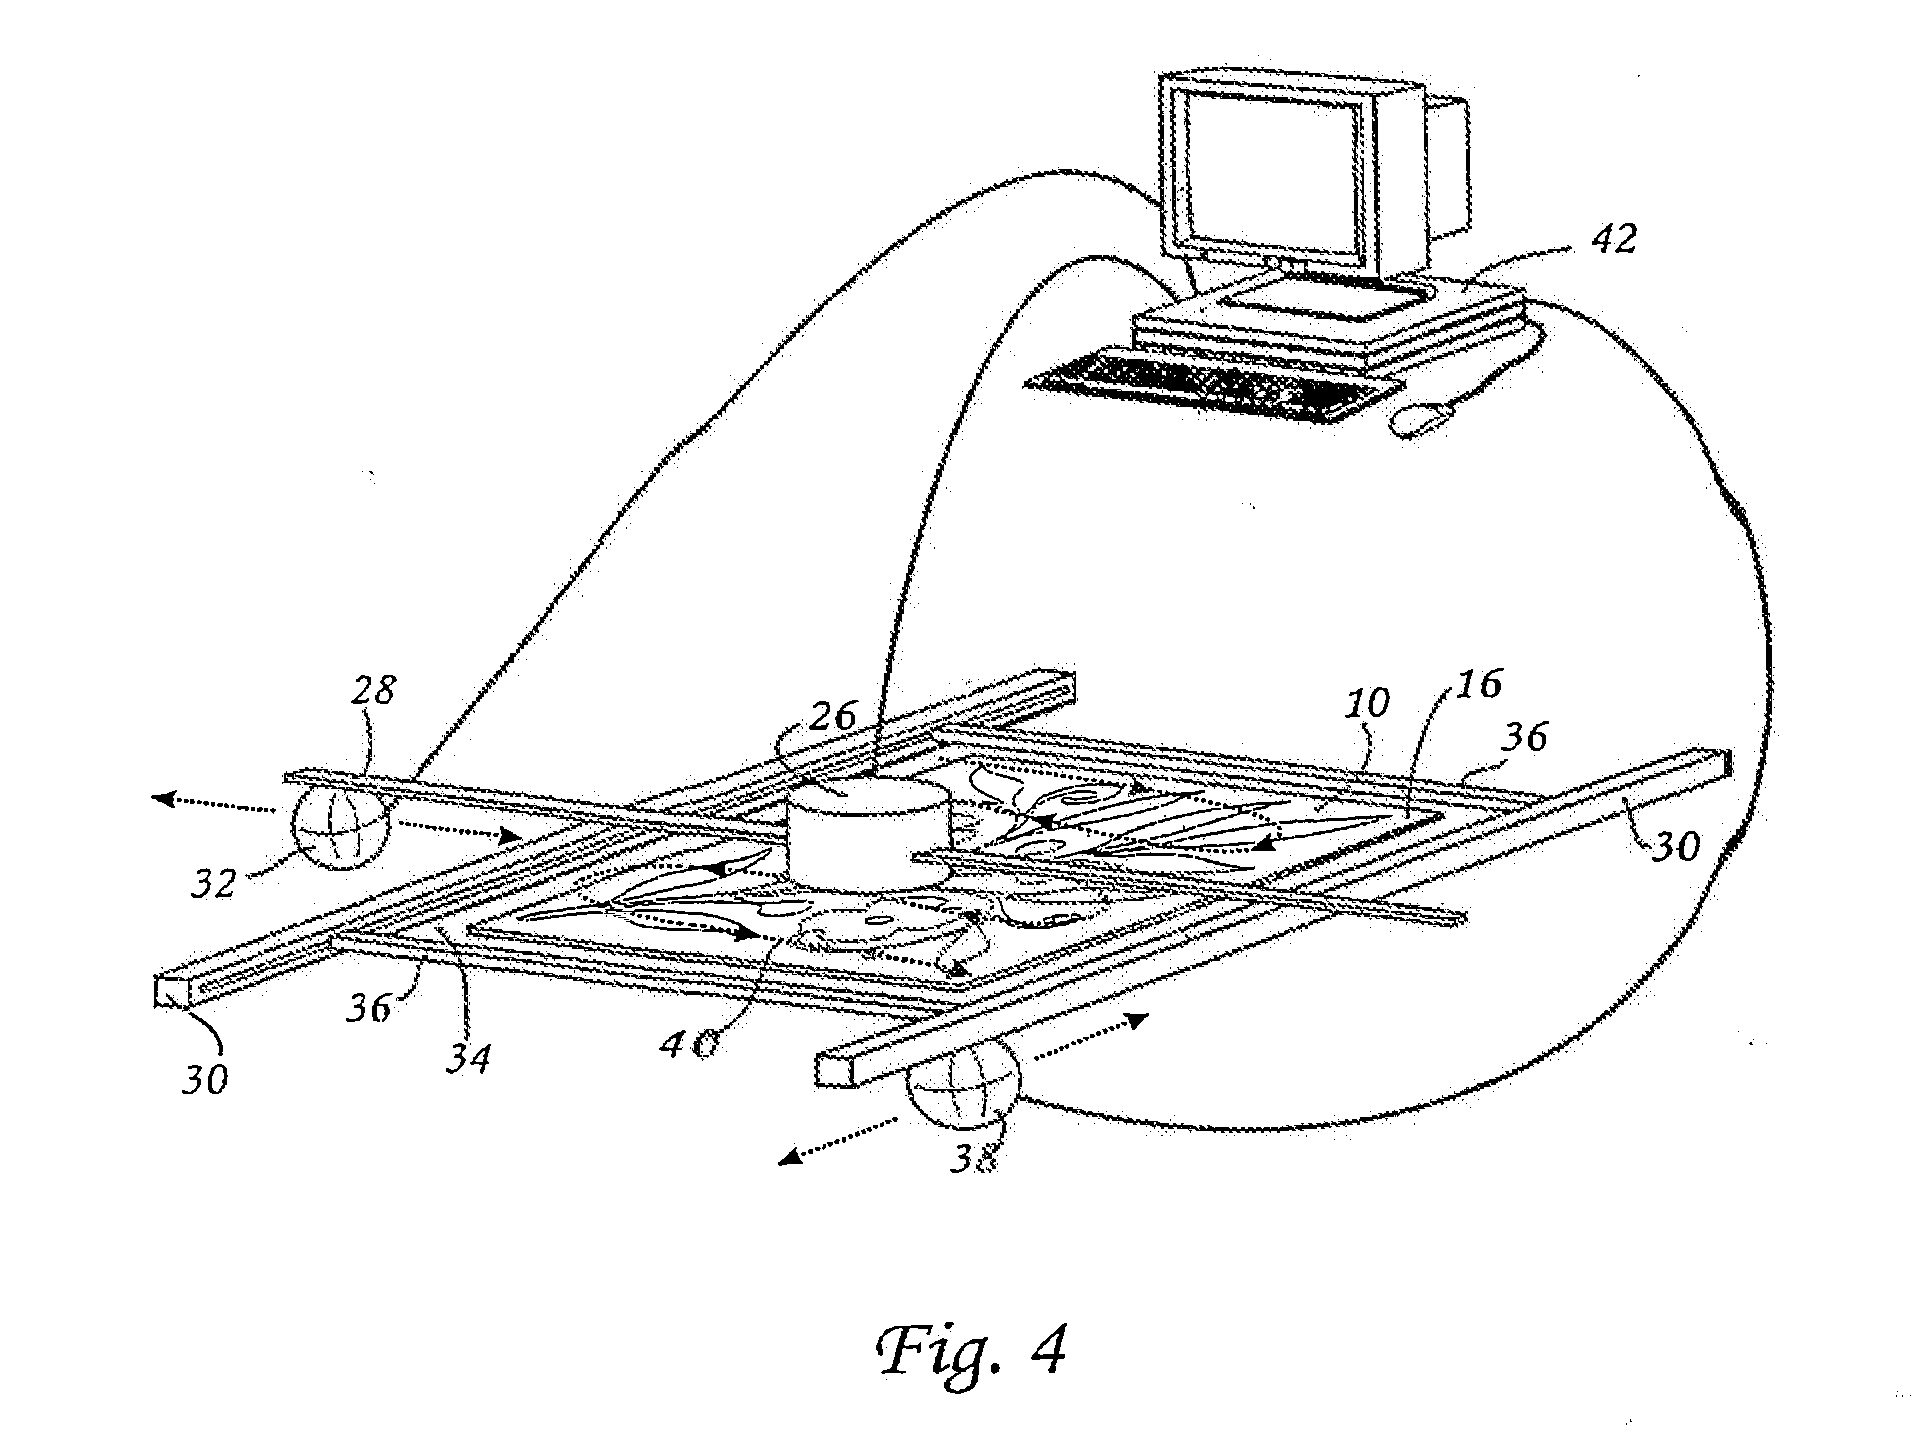 Method for the automated production of three-dimensional objects and textured substrates from two-dimensional or three-dimensional objects